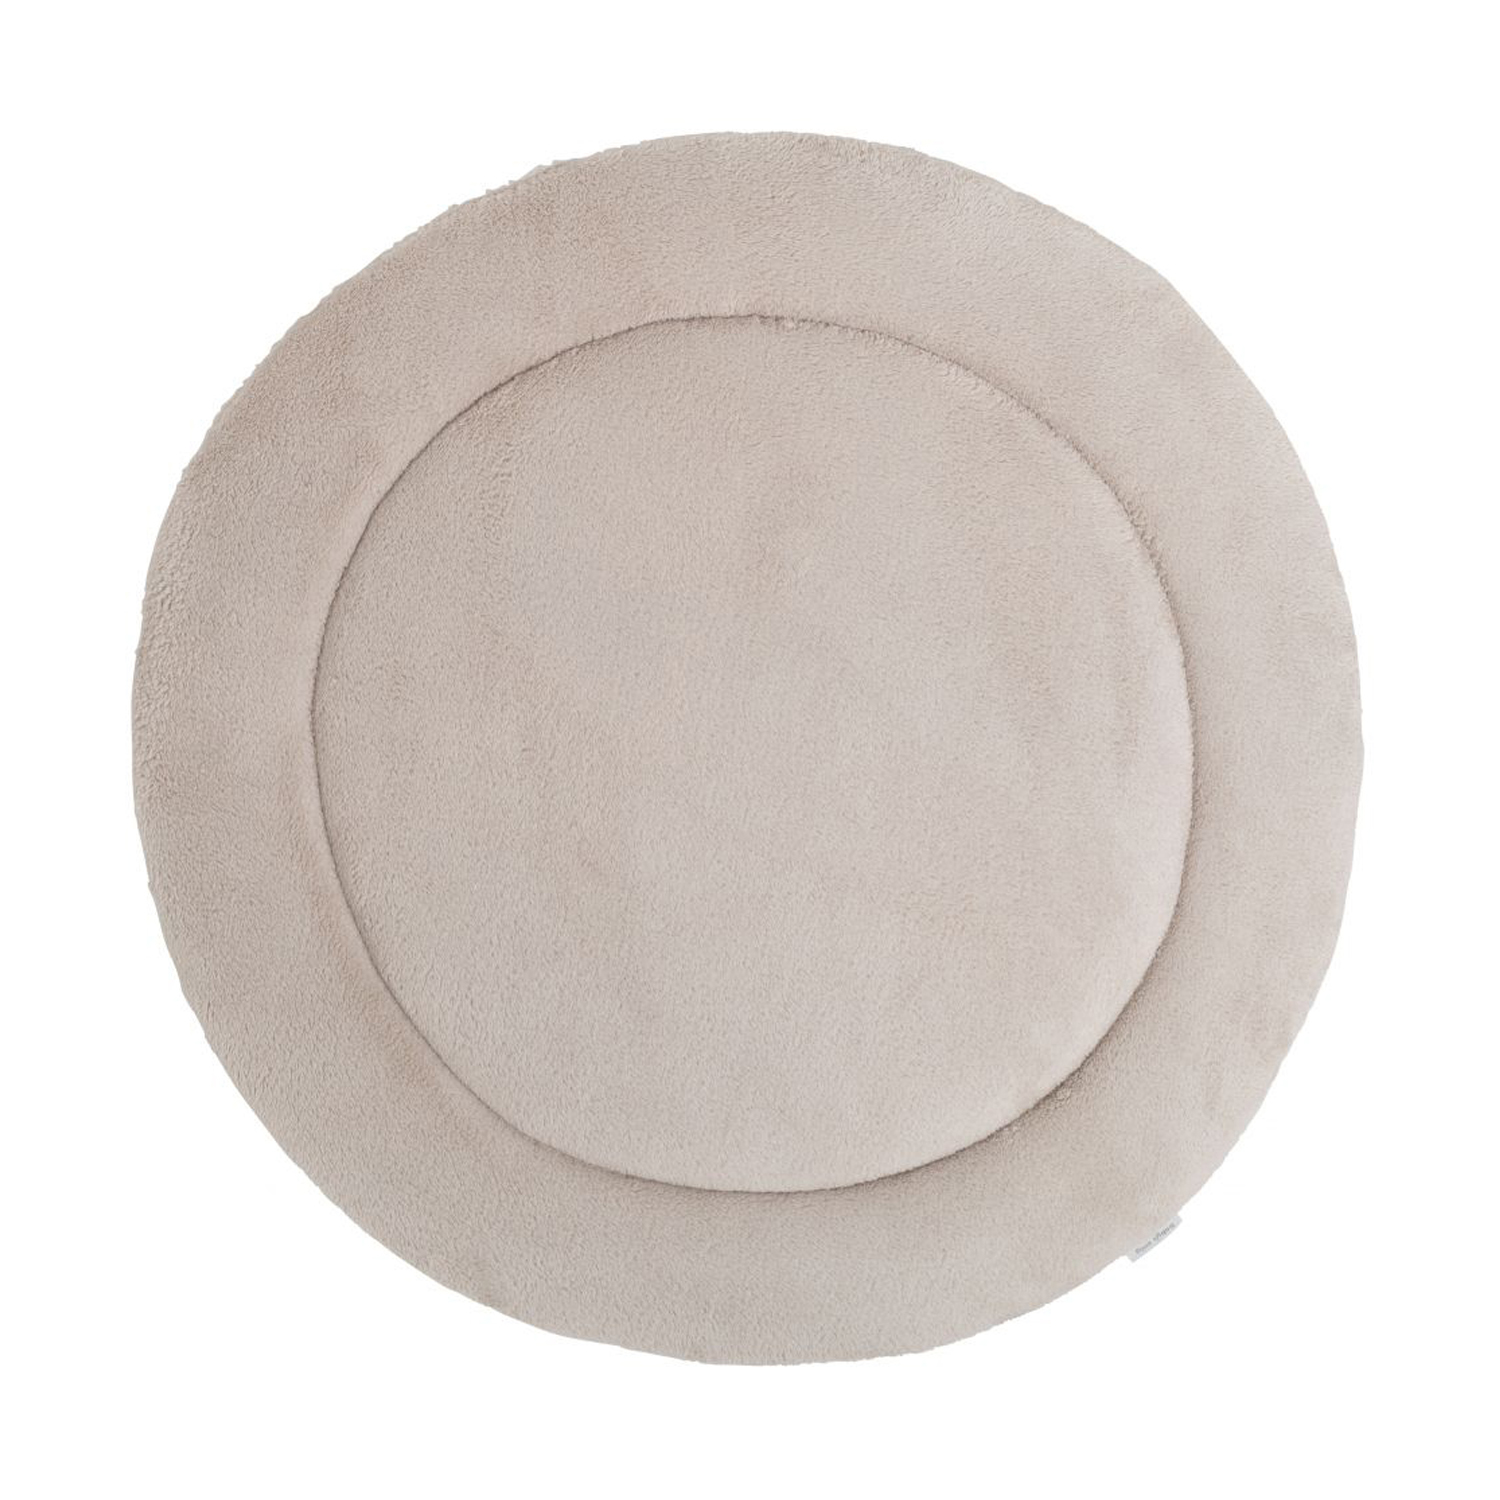 Baby's Only Cozy Boxkleed Rond - Urban Taupe - Ø90 cm